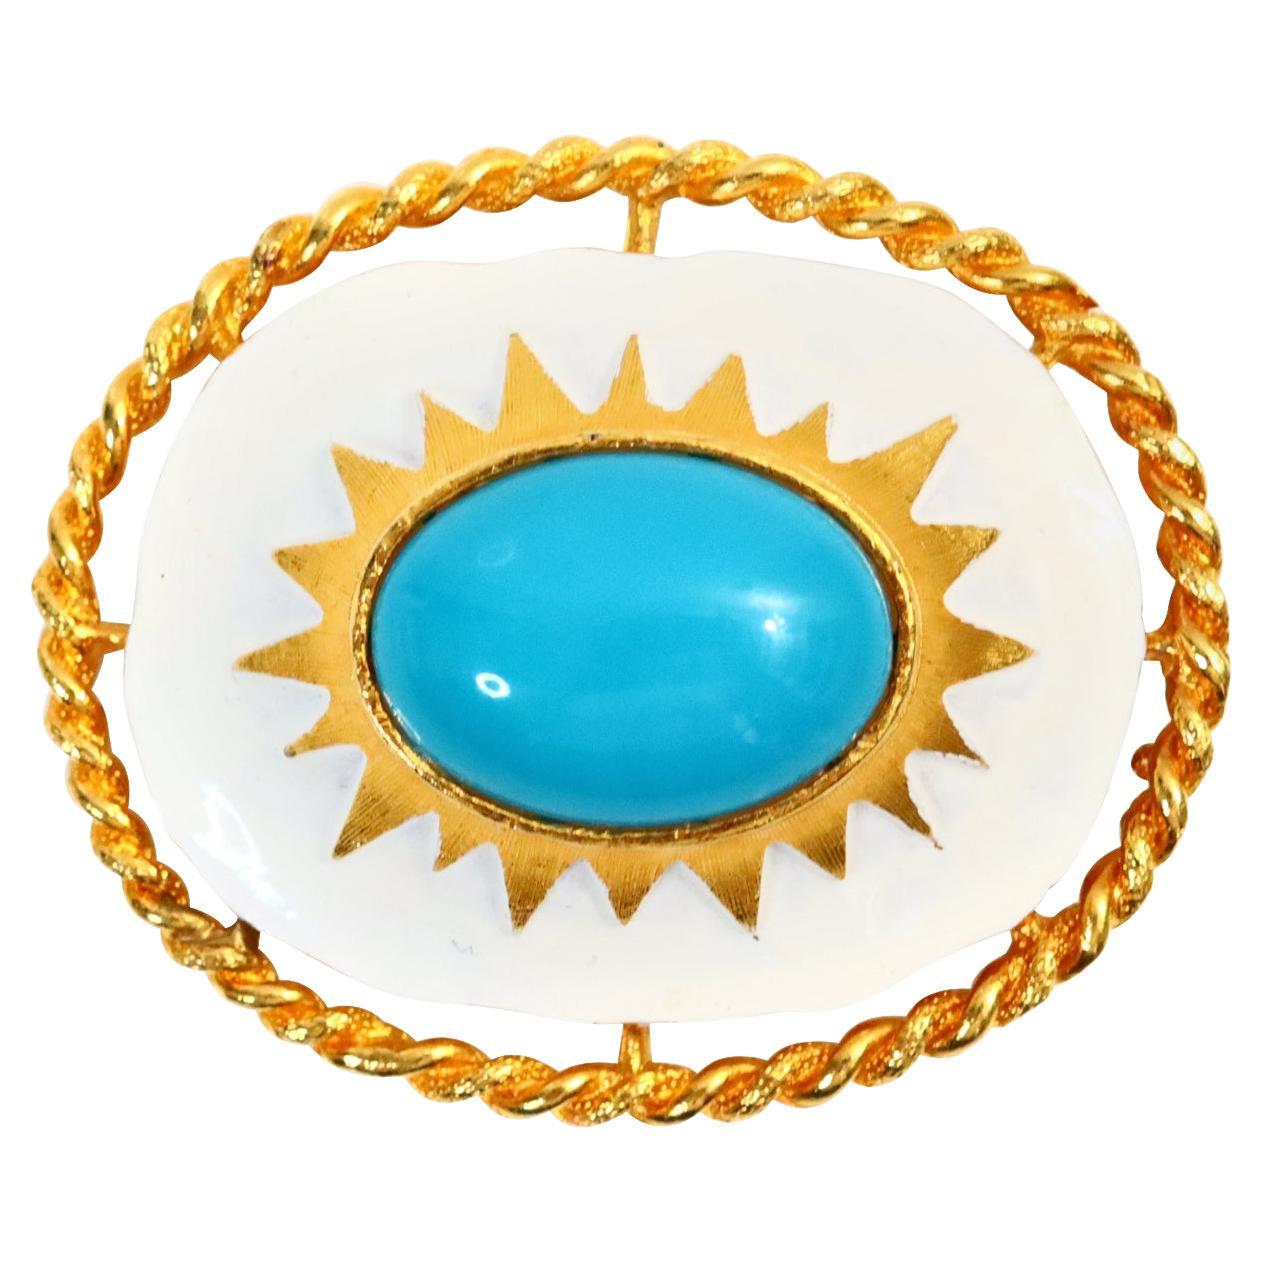 Vintage Cadoro Gold with Faux Turquoise and White Enamel Brooch, Circa 1980s For Sale